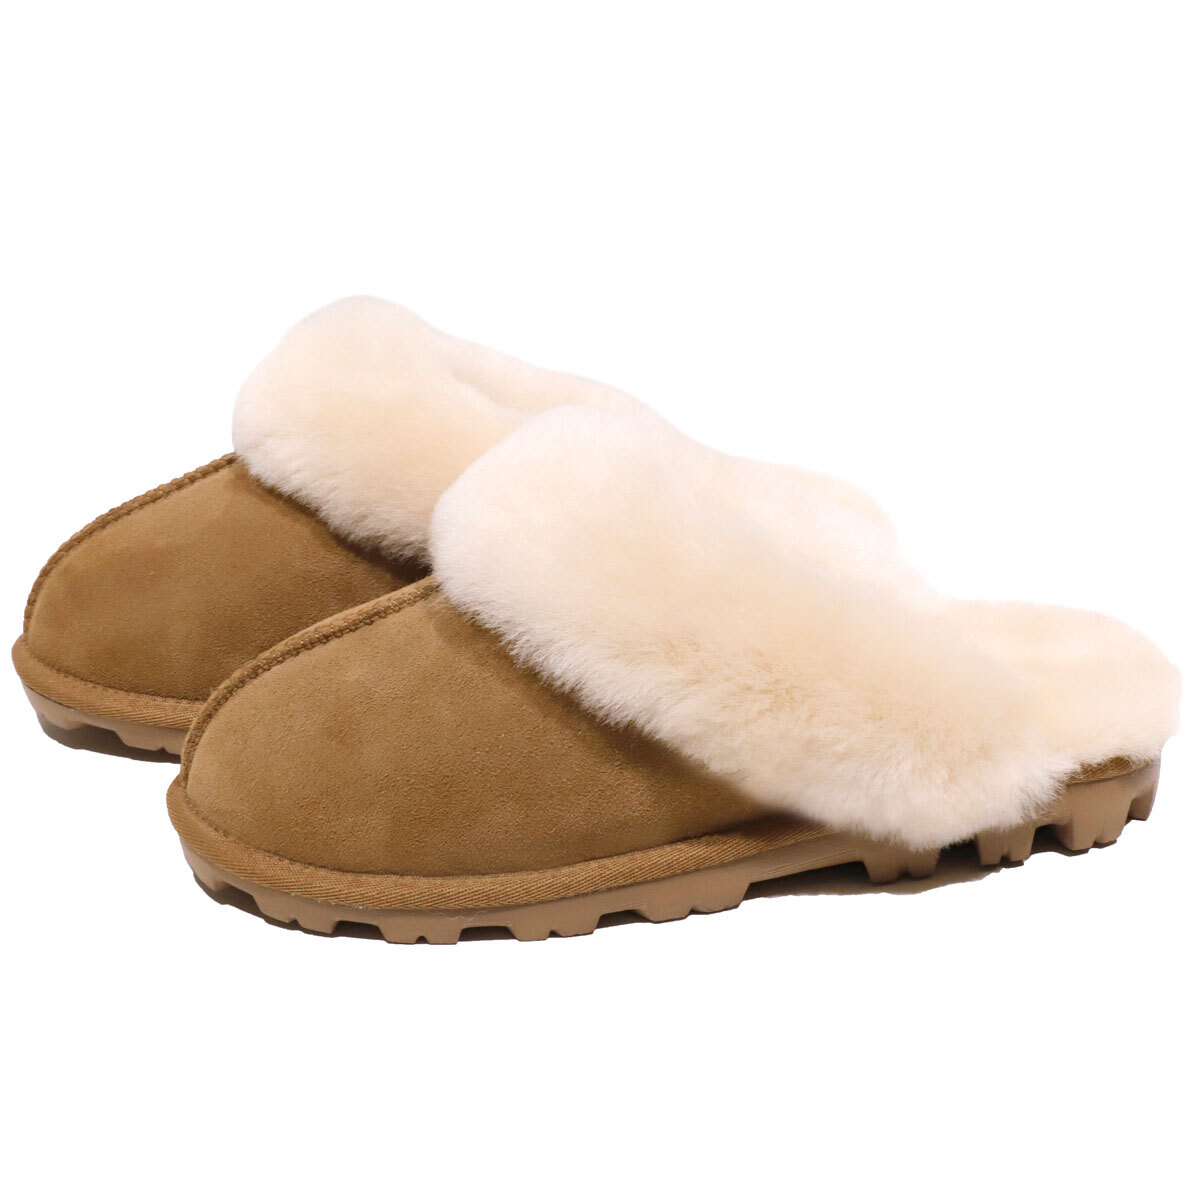 Shearling Slippers in Chestnut, Size 